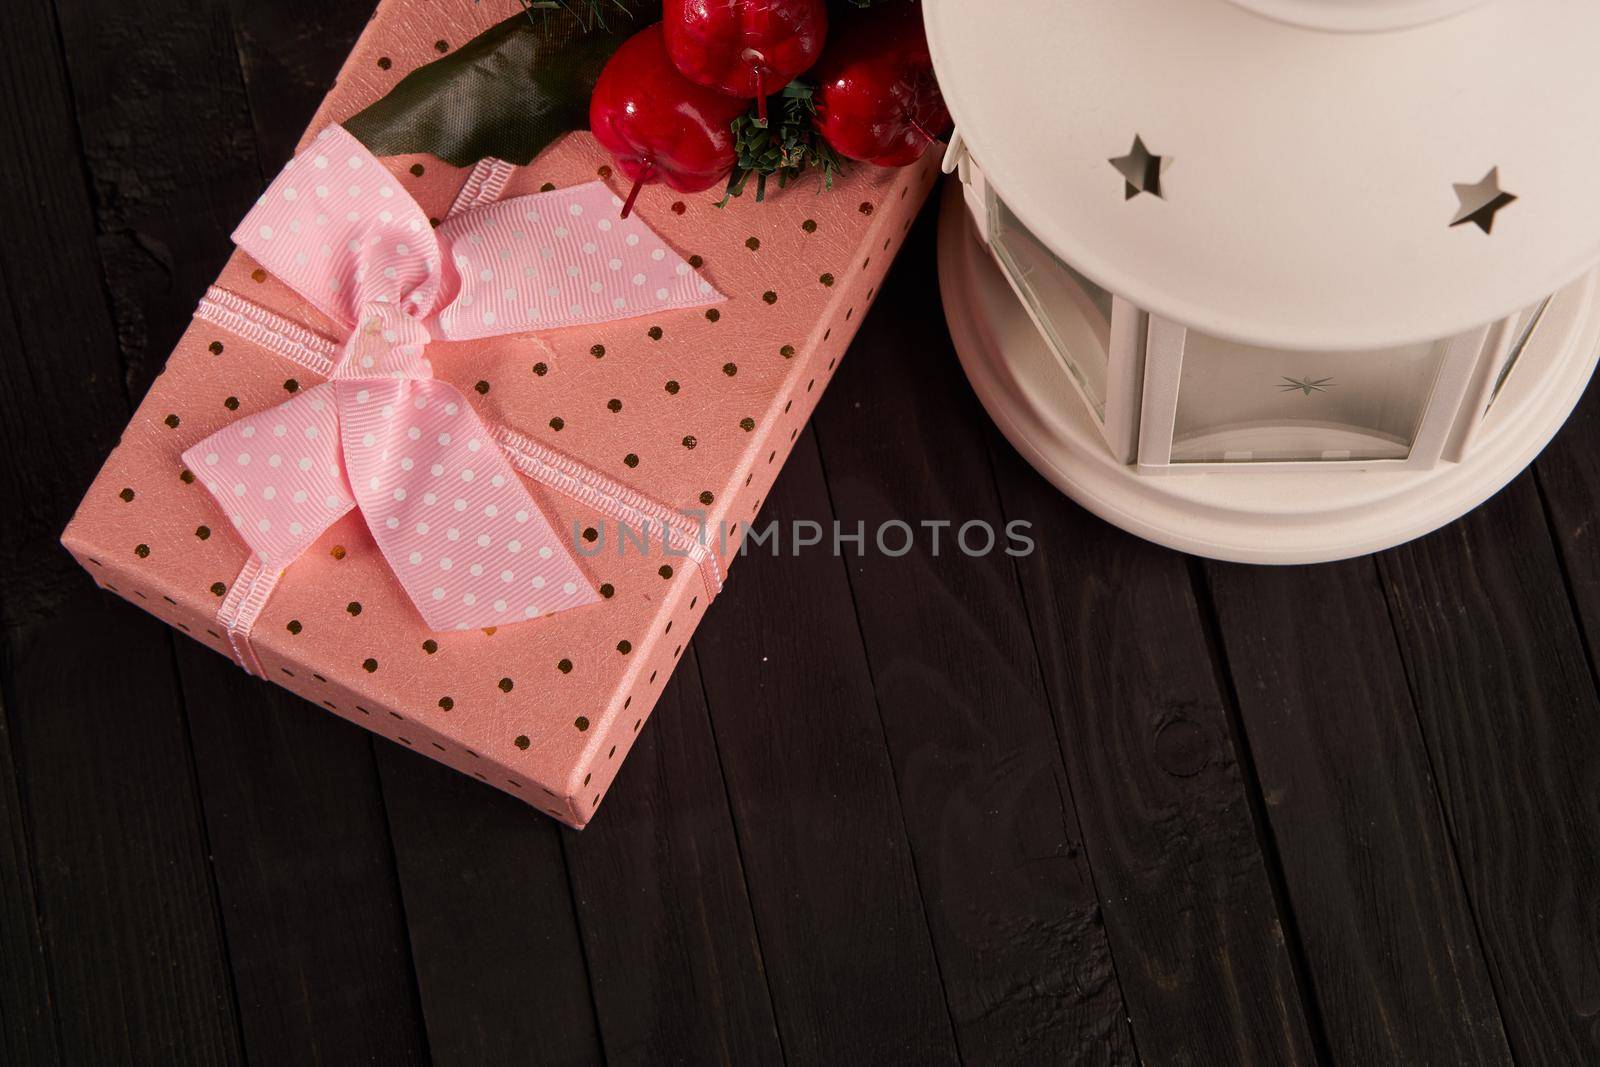 gift christmas box decoration holiday wooden table. High quality photo